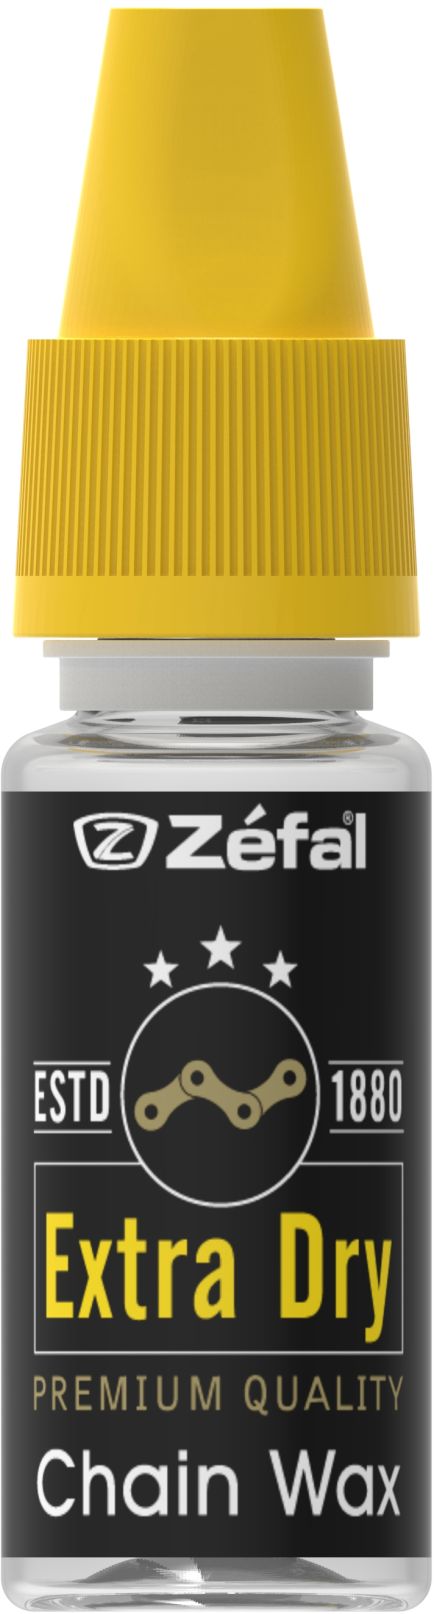 Zefal Extra Dry Wax